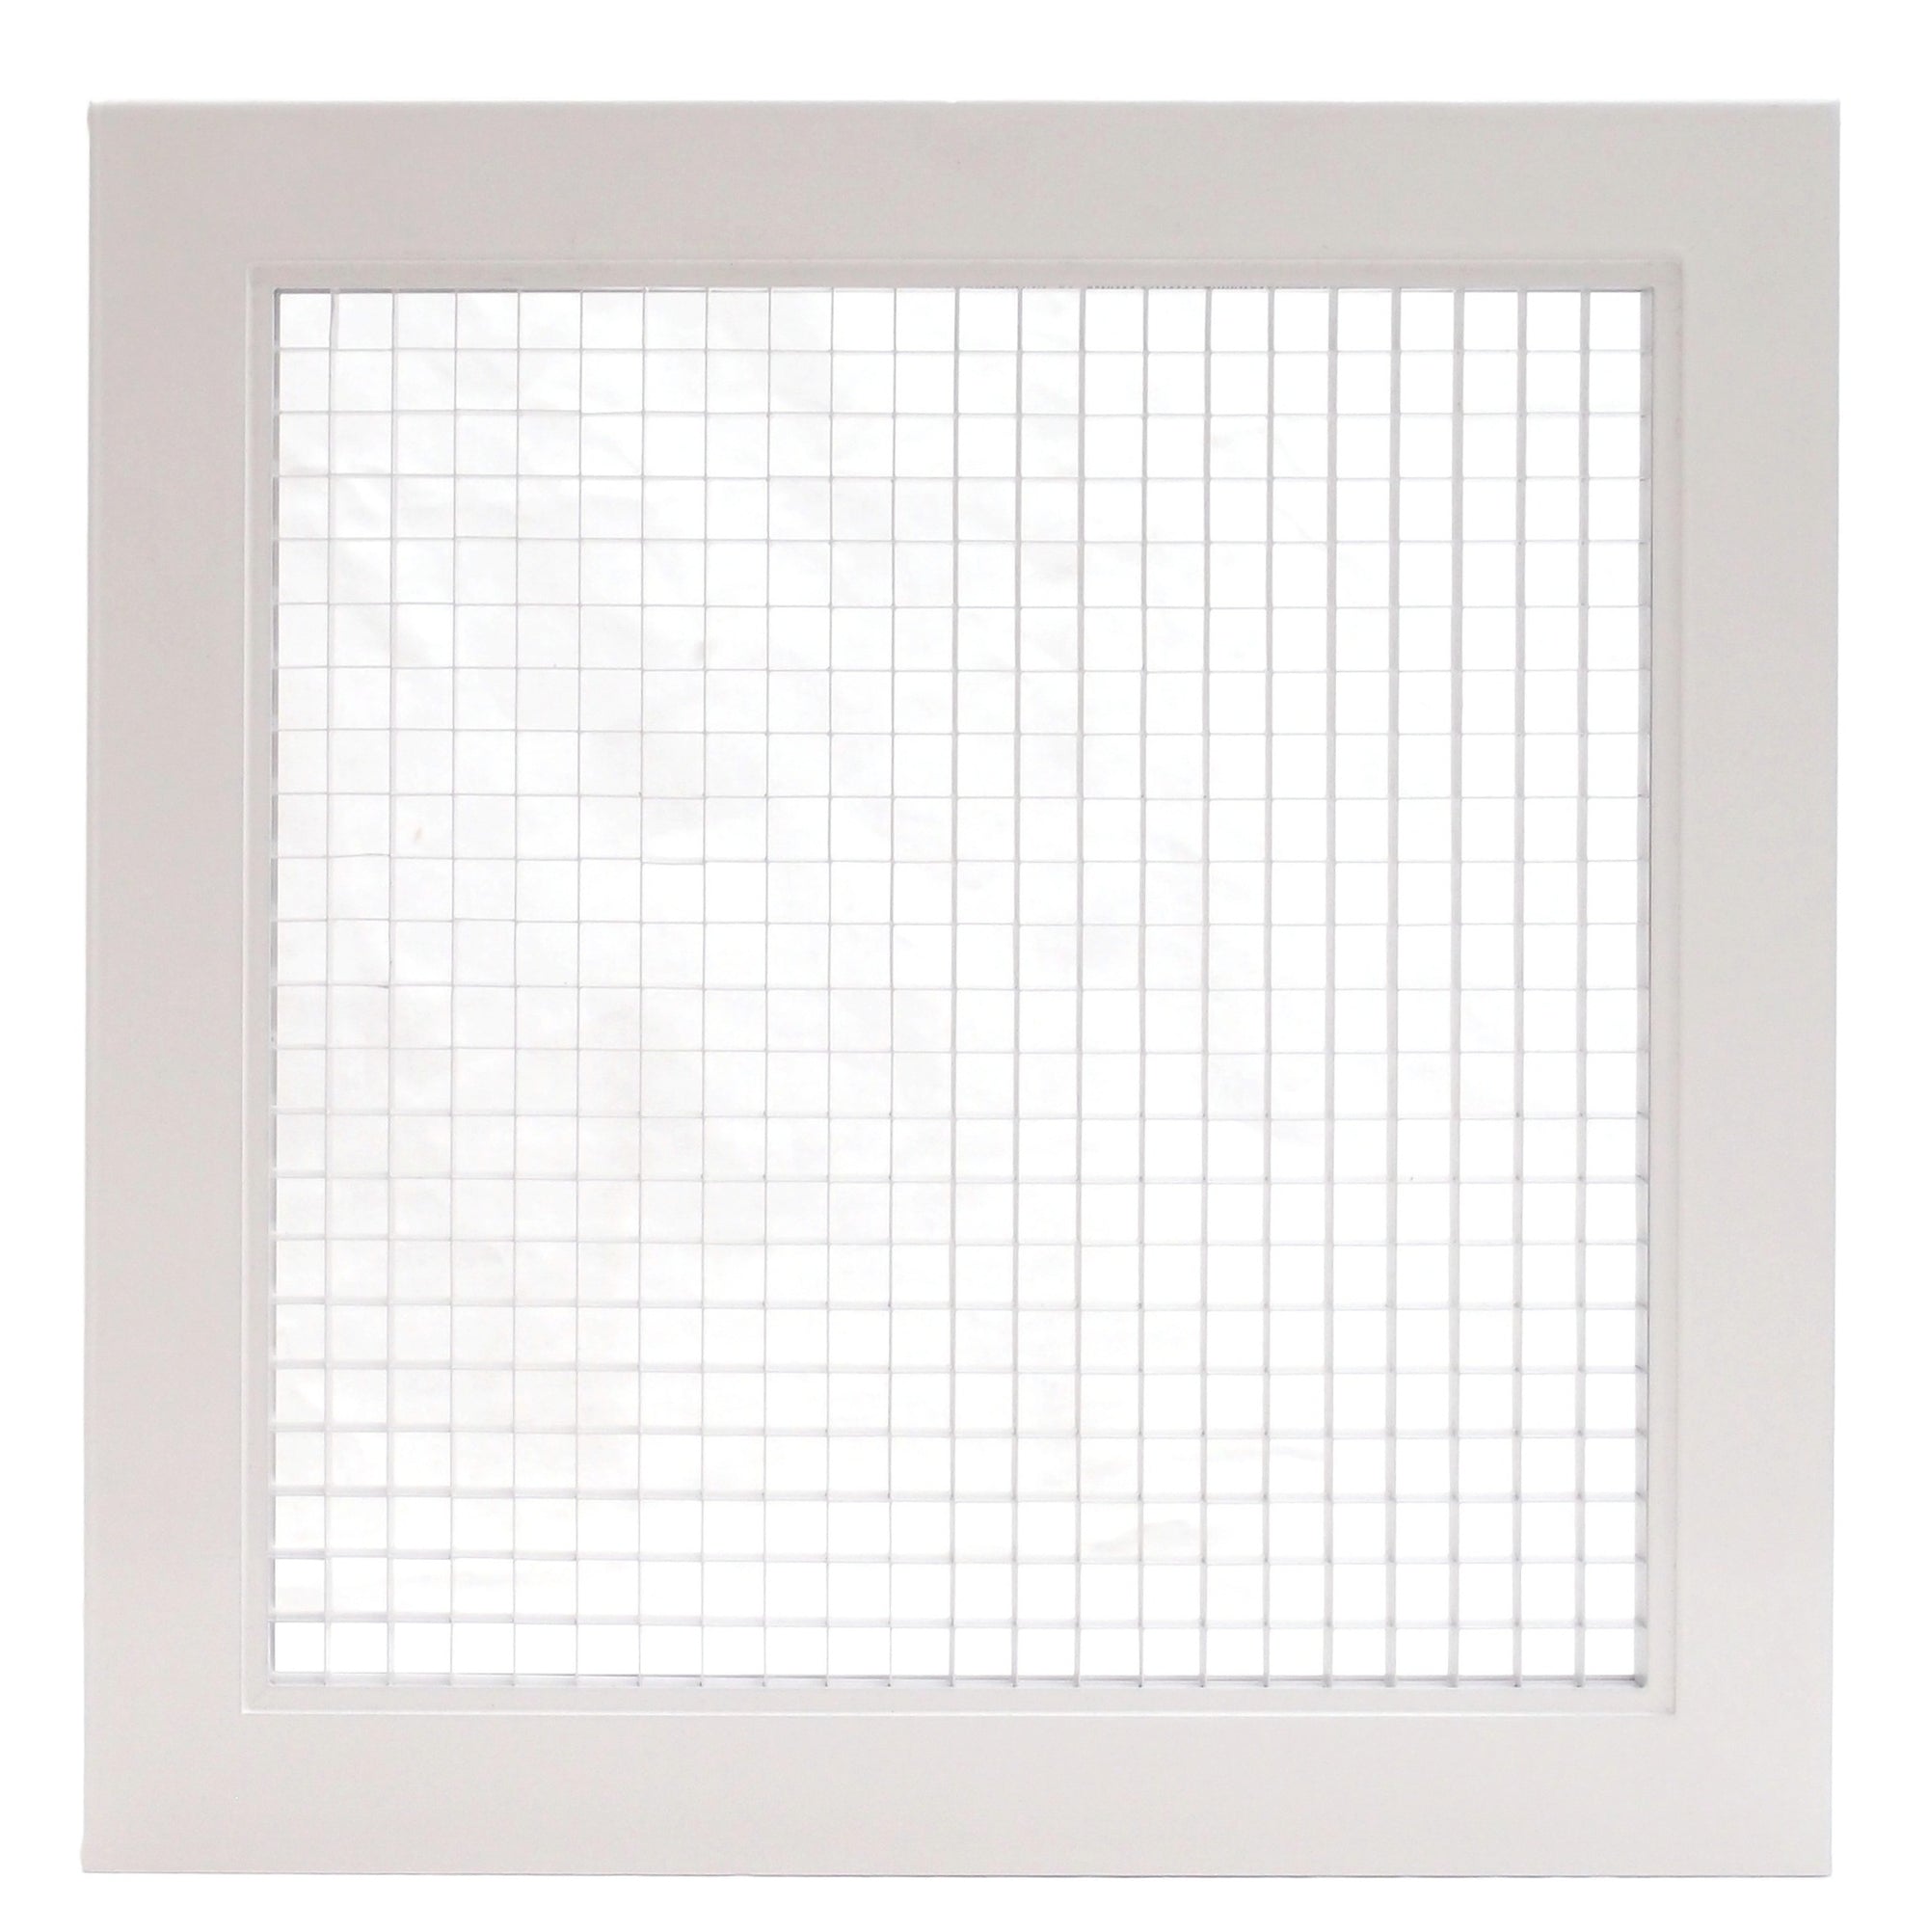 30" x 8" Cube Core Eggcrate Return Air Filter Grille for 1" Filter